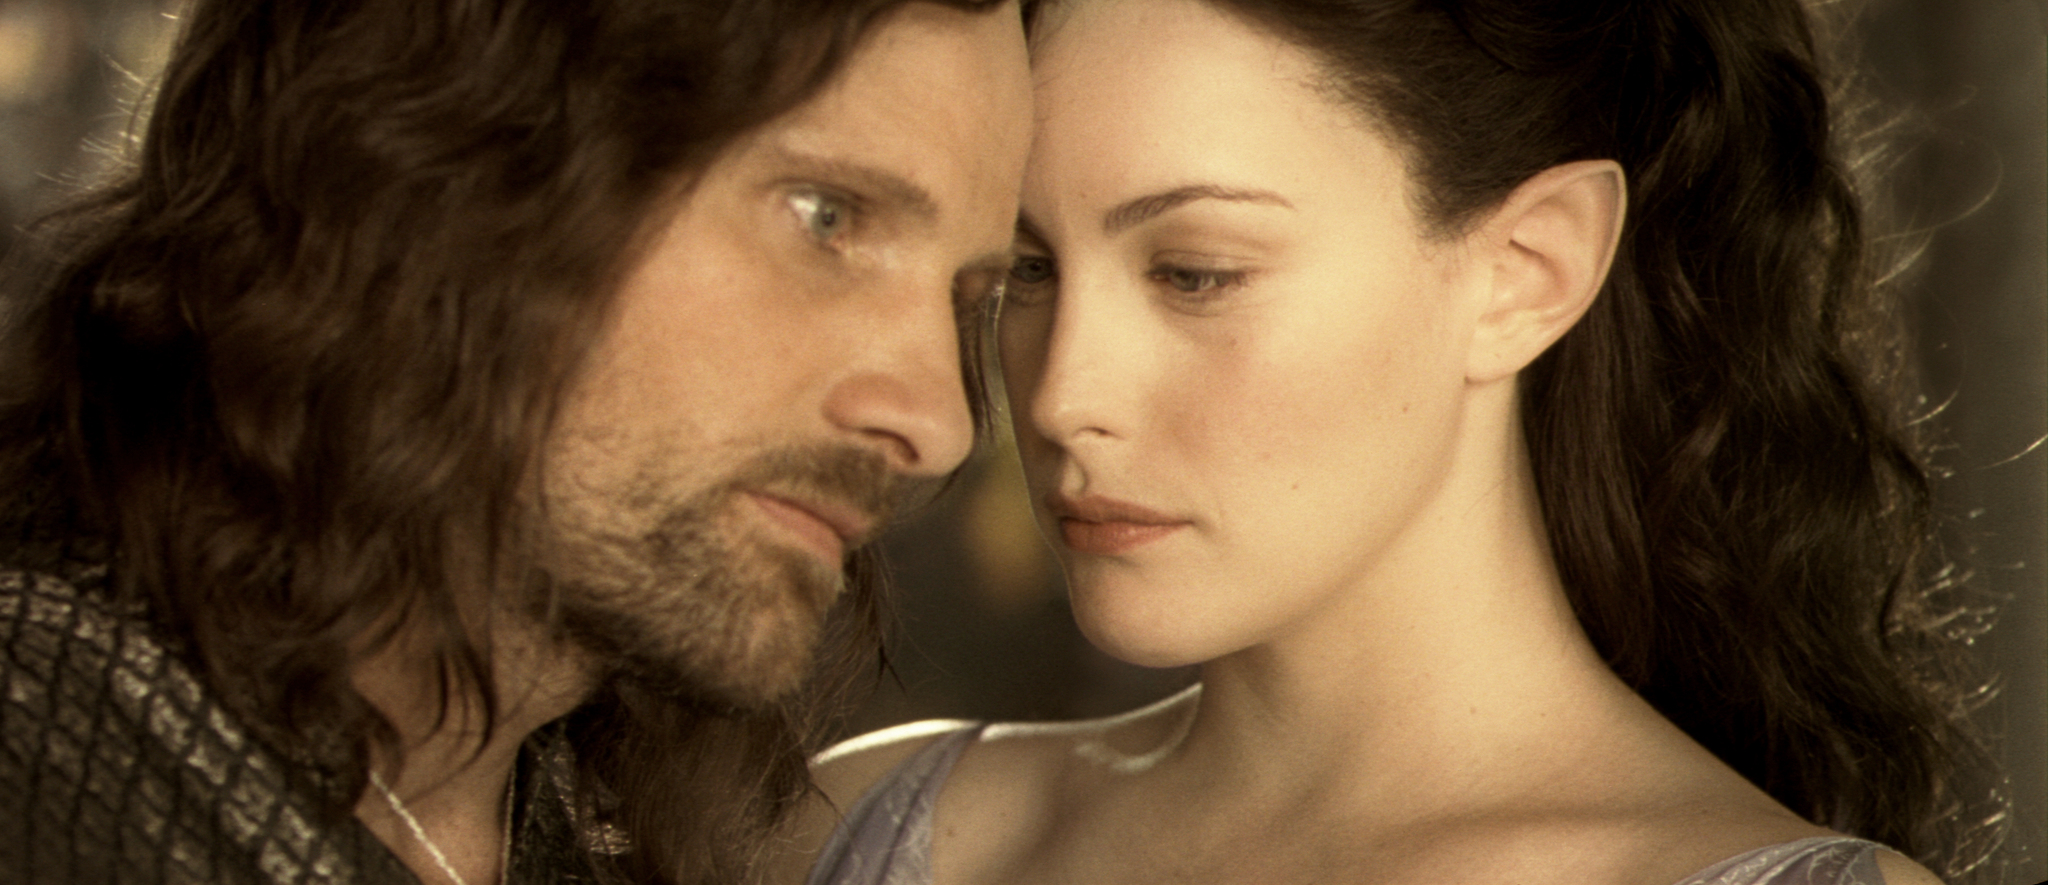 Liv Tyler and Viggo Mortensen in The Lord of the Rings: The Two Towers (2002)